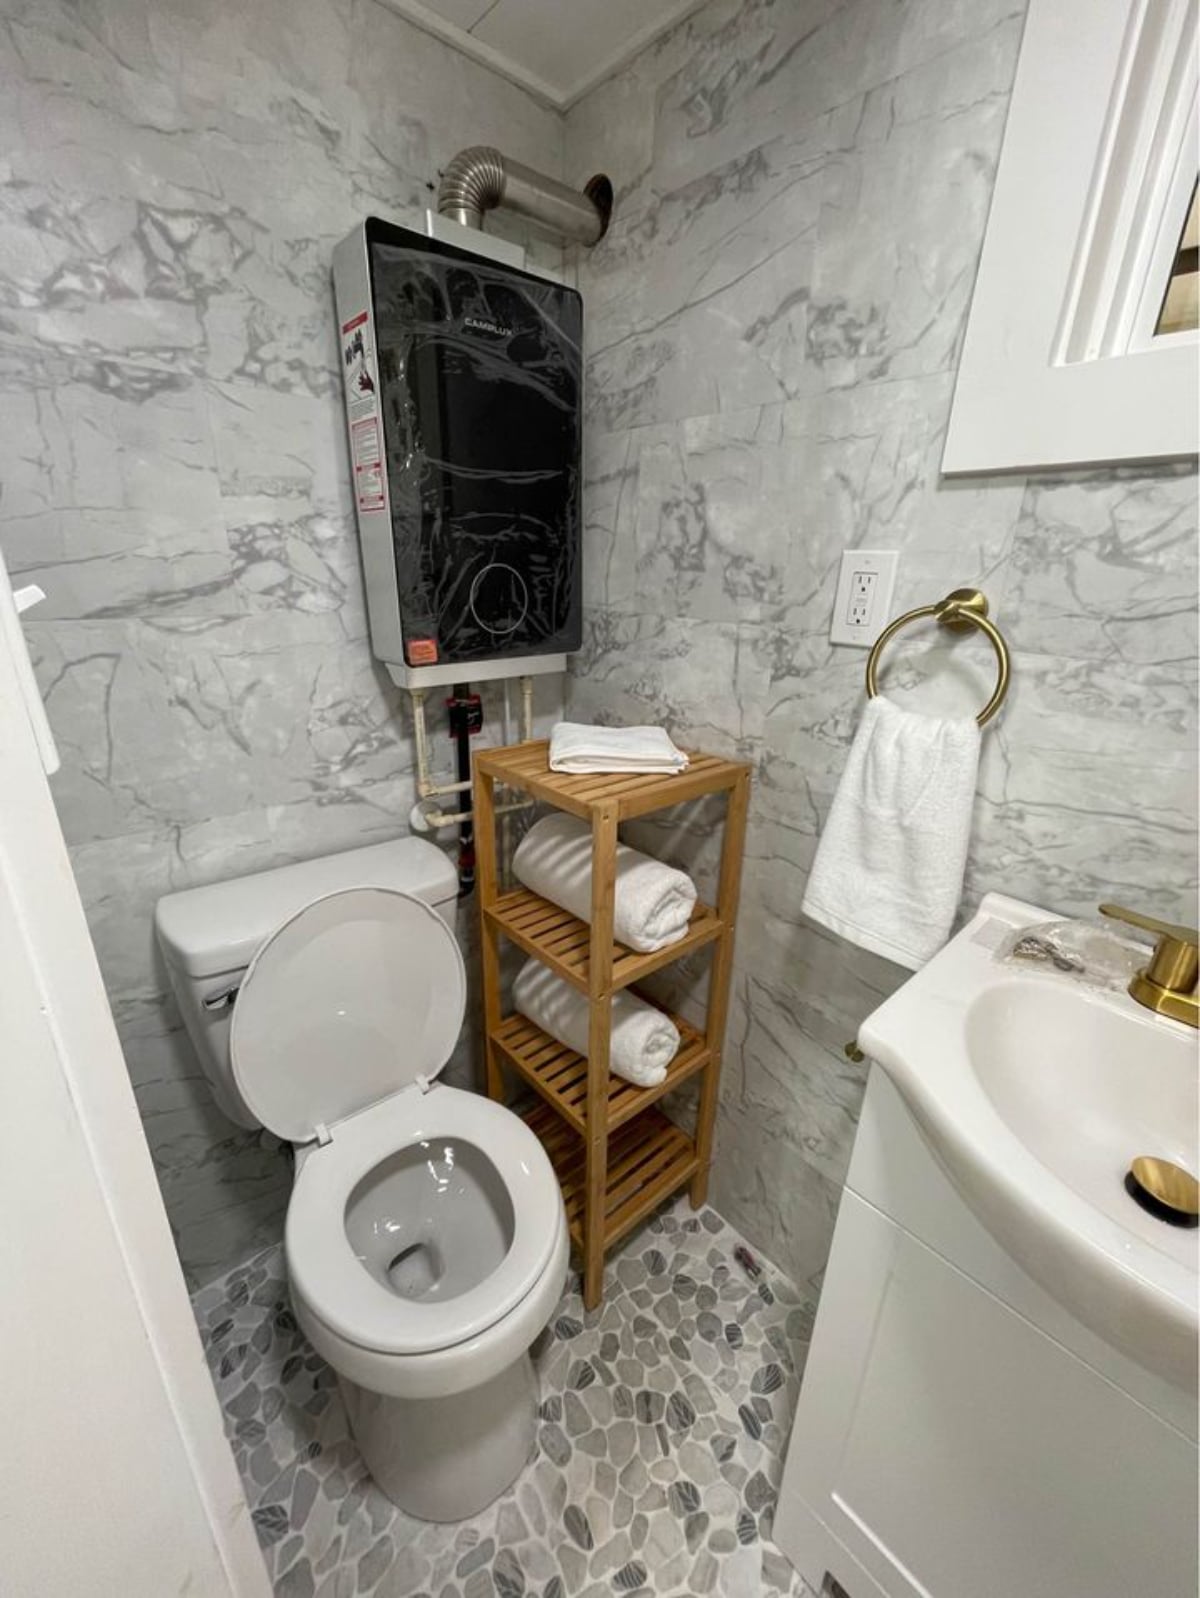 Compact yet stylish white interior bathroom toilet of 16' Compact Tiny House